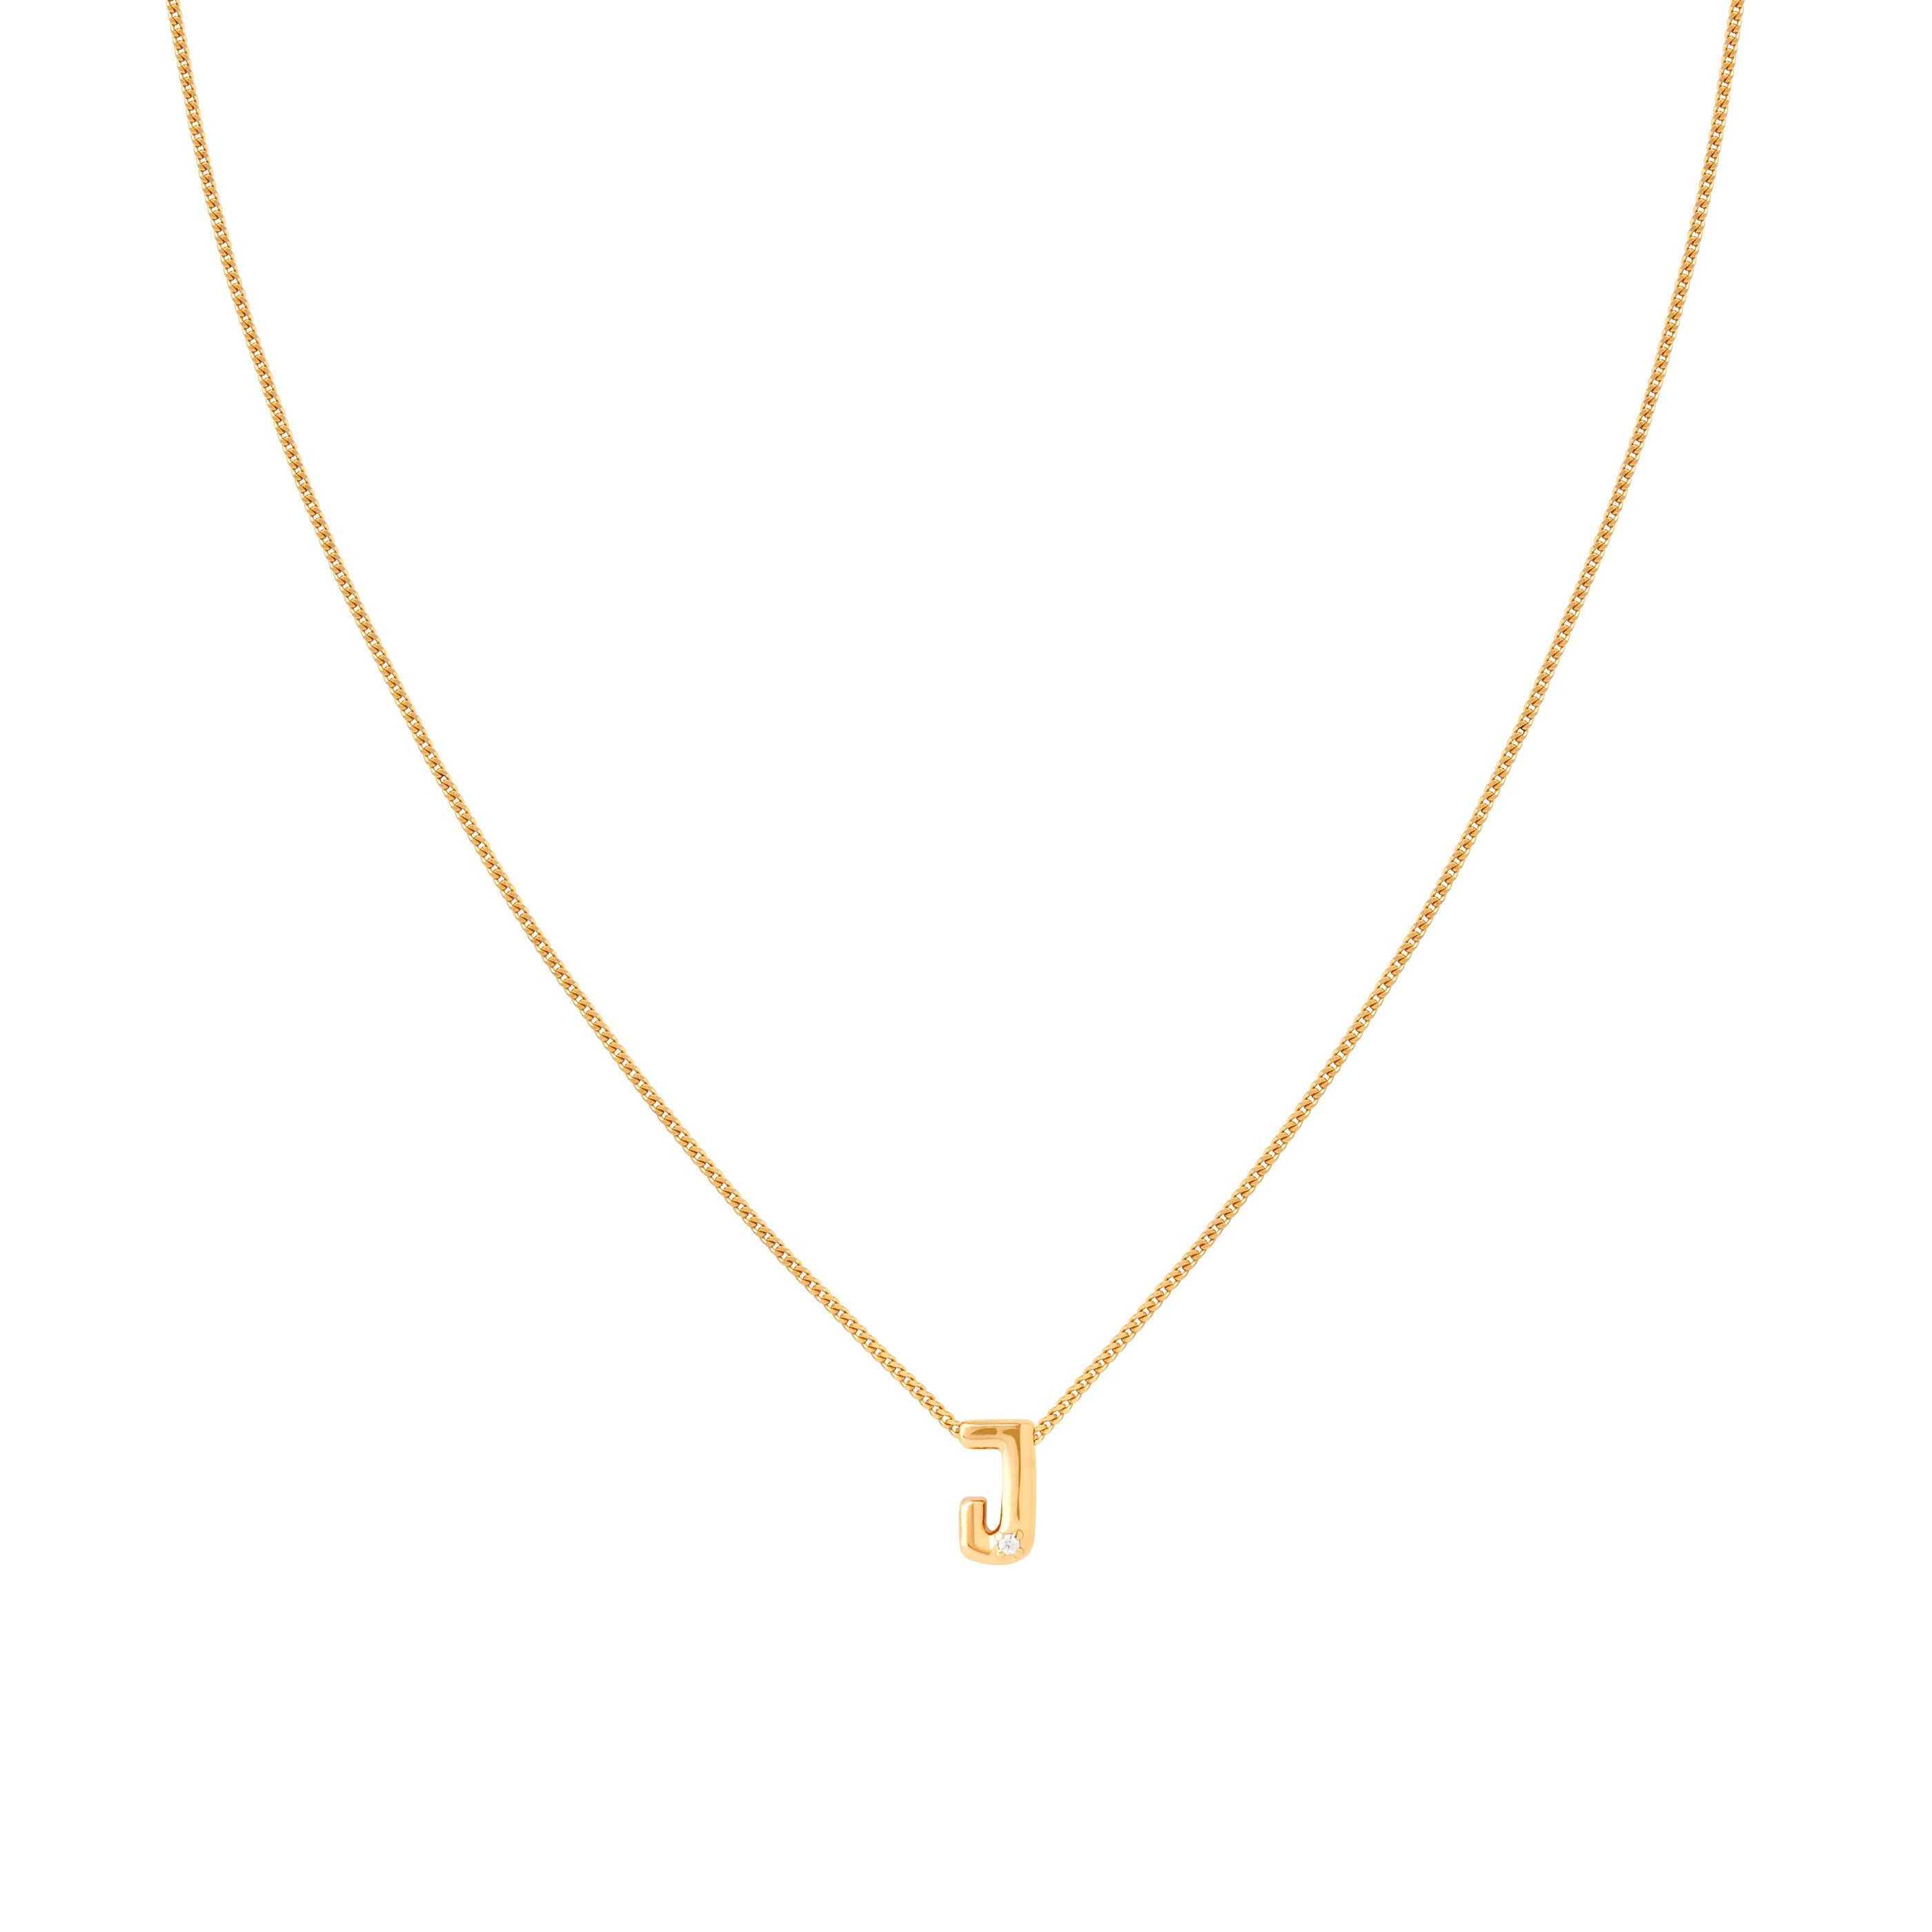 J Initial Pendant Necklace in Gold